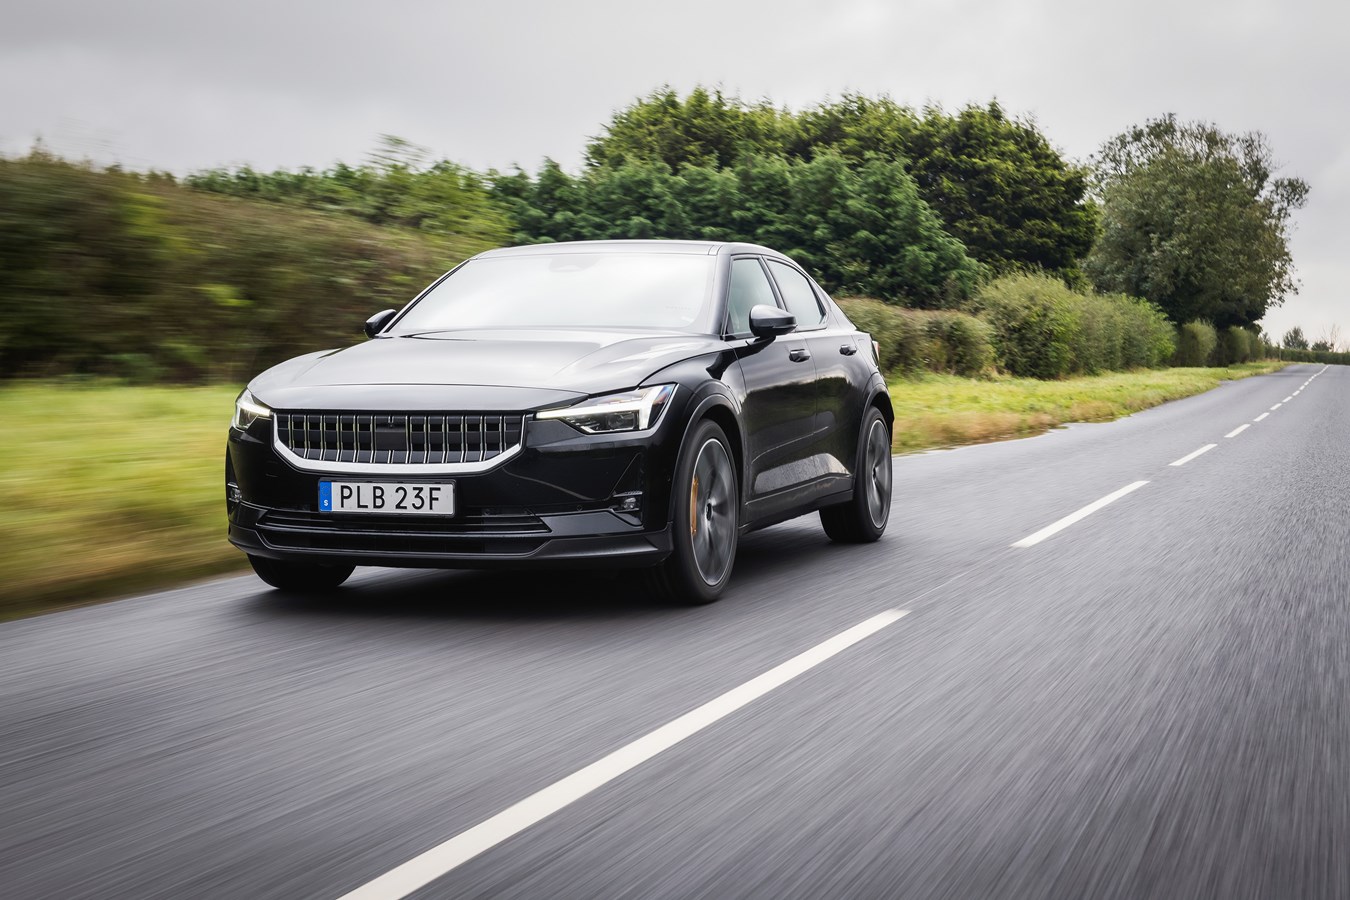 Polestar 2 driving experience is developed all over the world